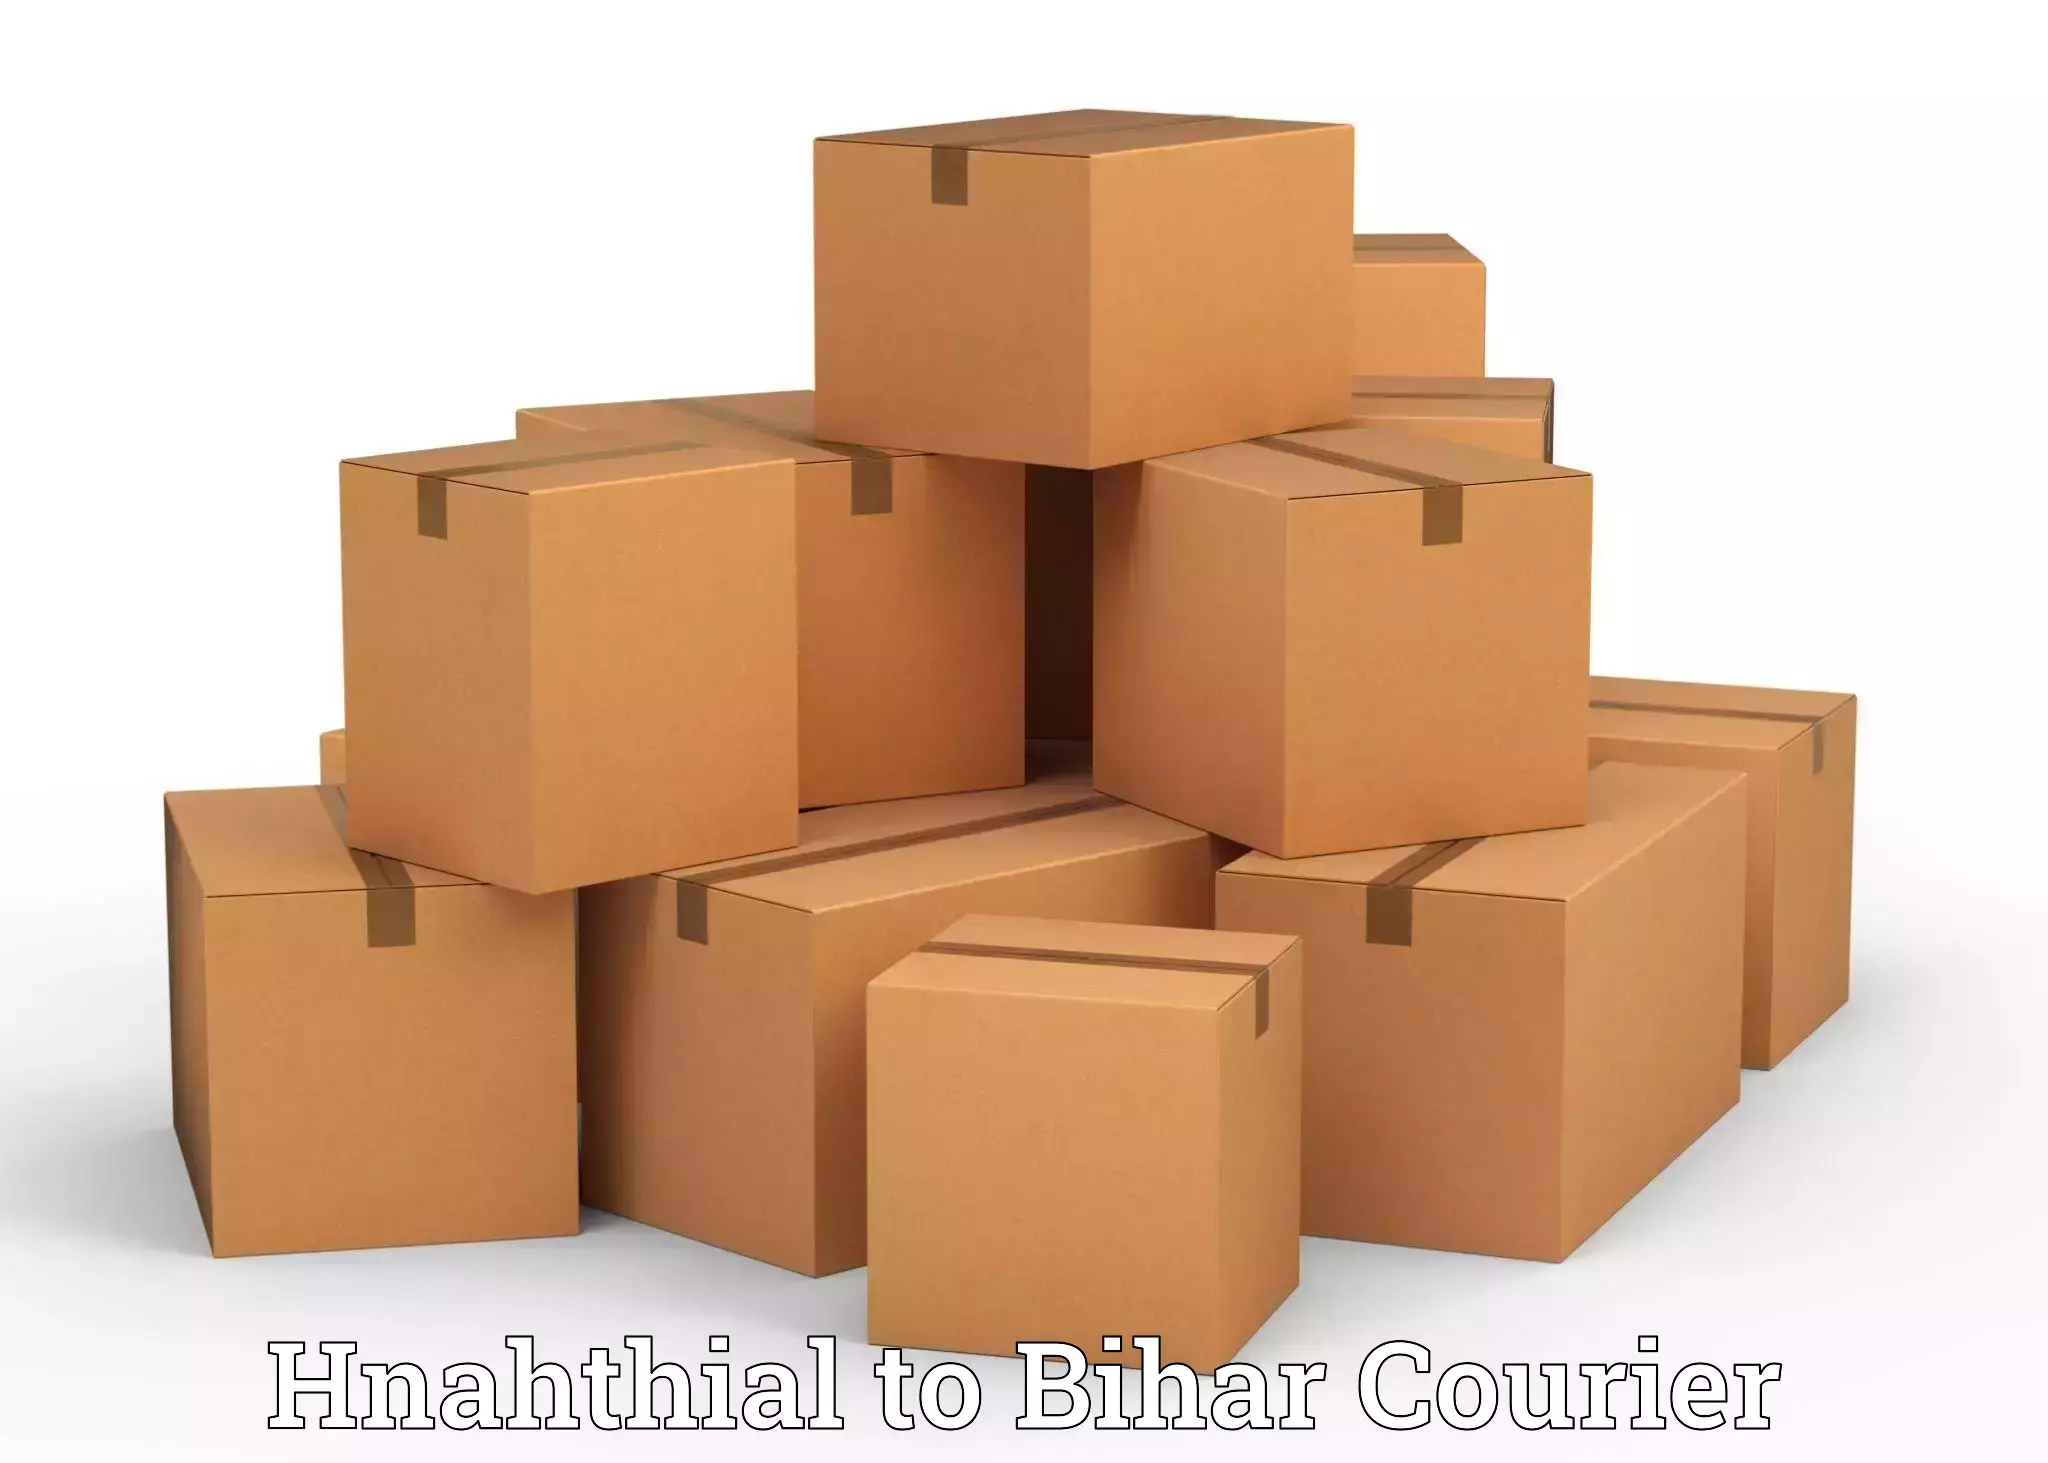 Affordable relocation services Hnahthial to Kaluahi